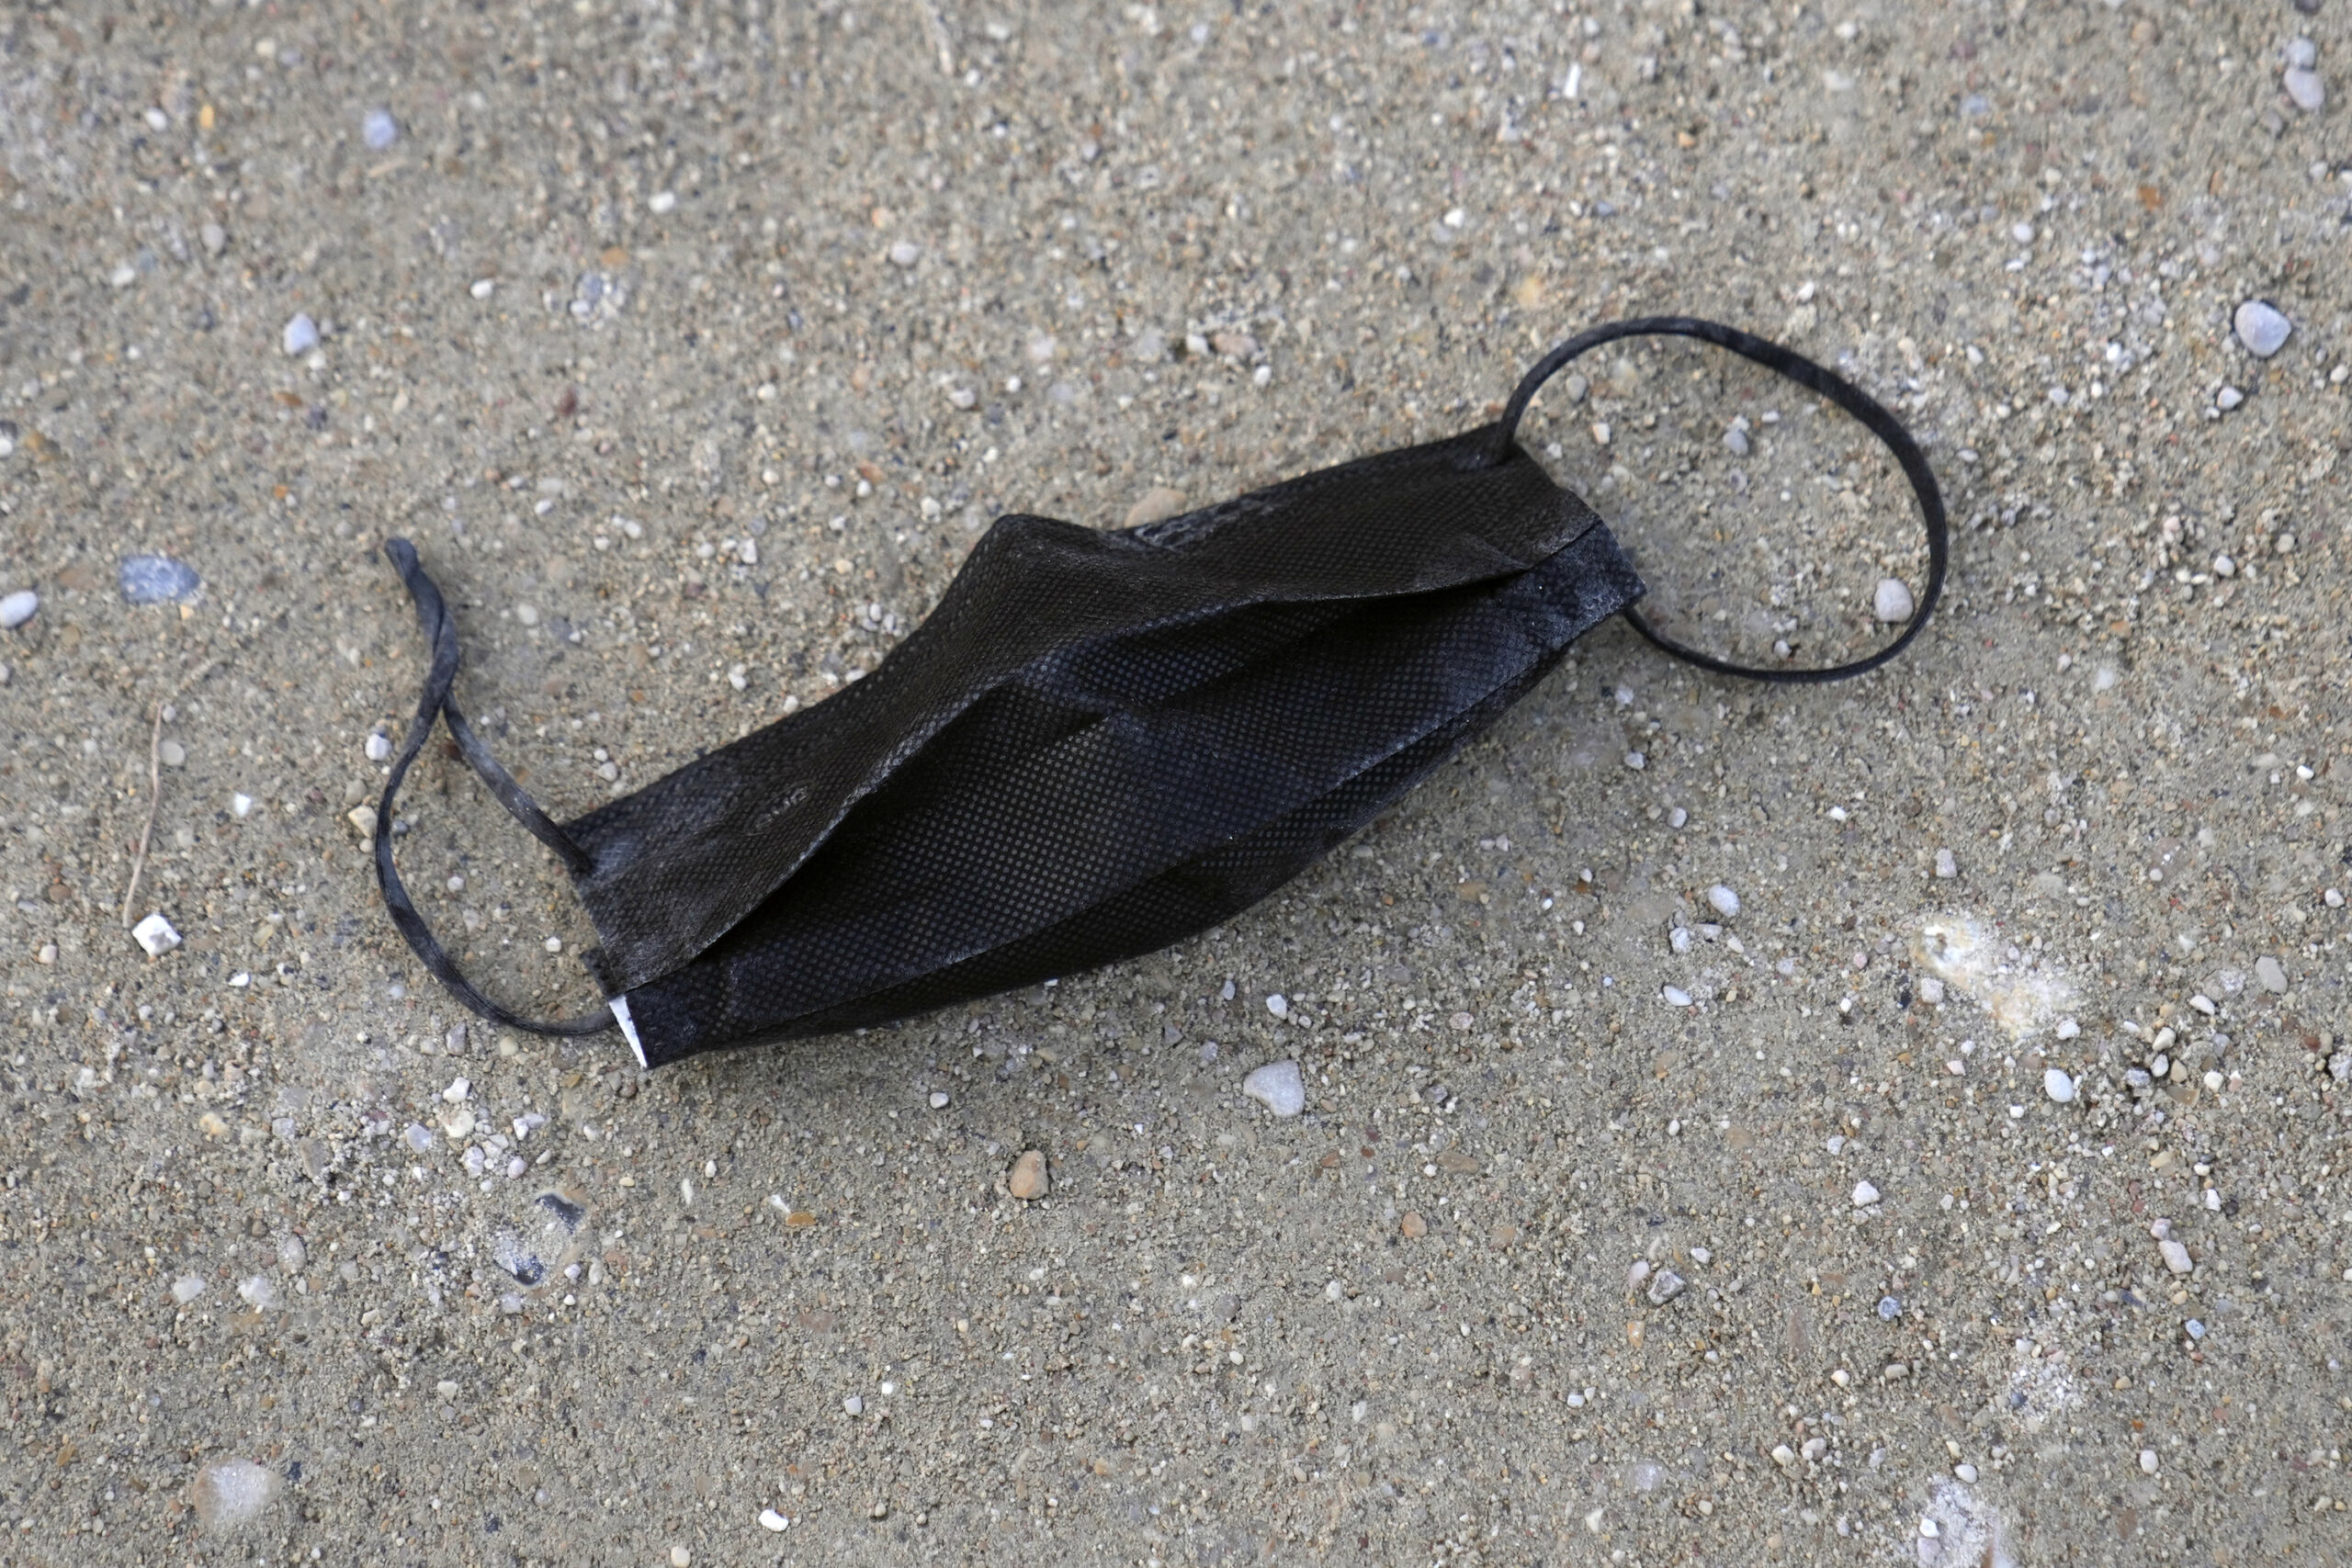 A used face mask lying on the ground